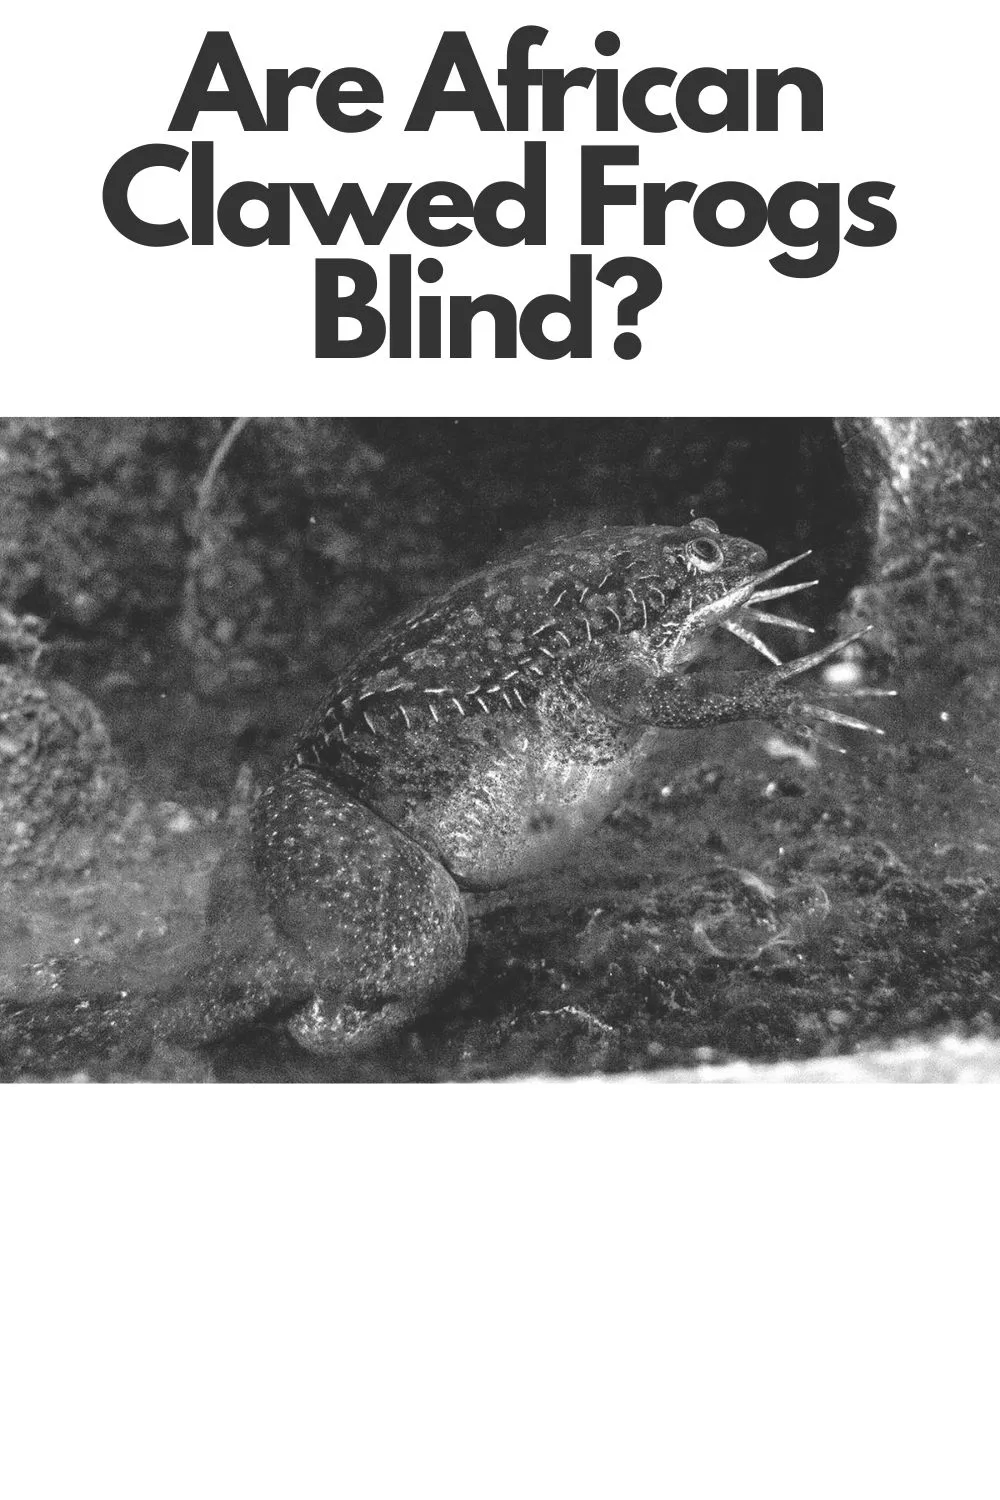 Are African Clawed Frogs Blind